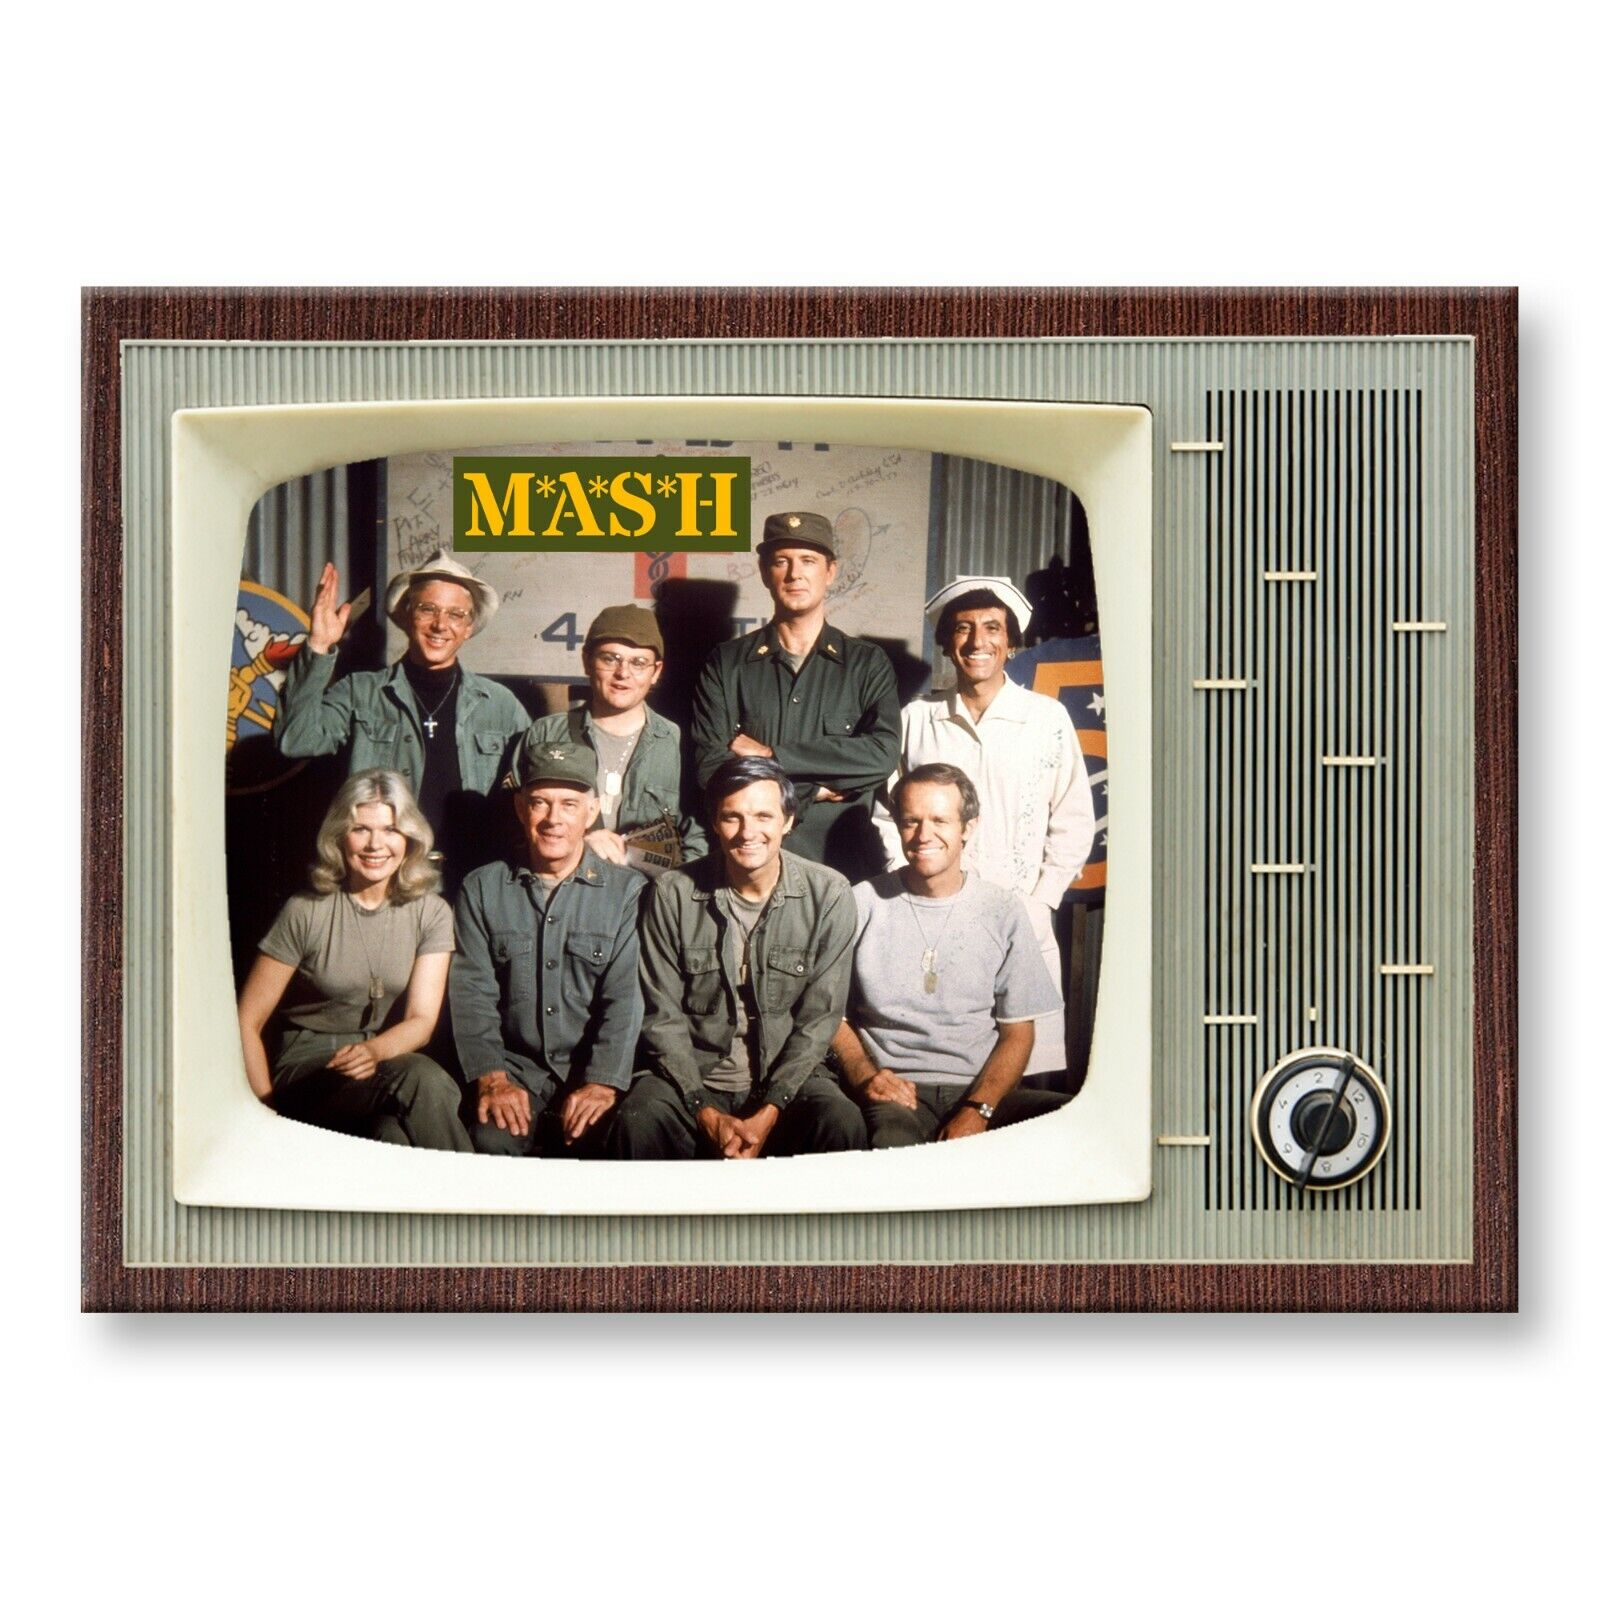 MASH M.A.S.H. TV Show Classic TV 3.5 inches x 2.5 inches Steel FRIDGE MAGNET